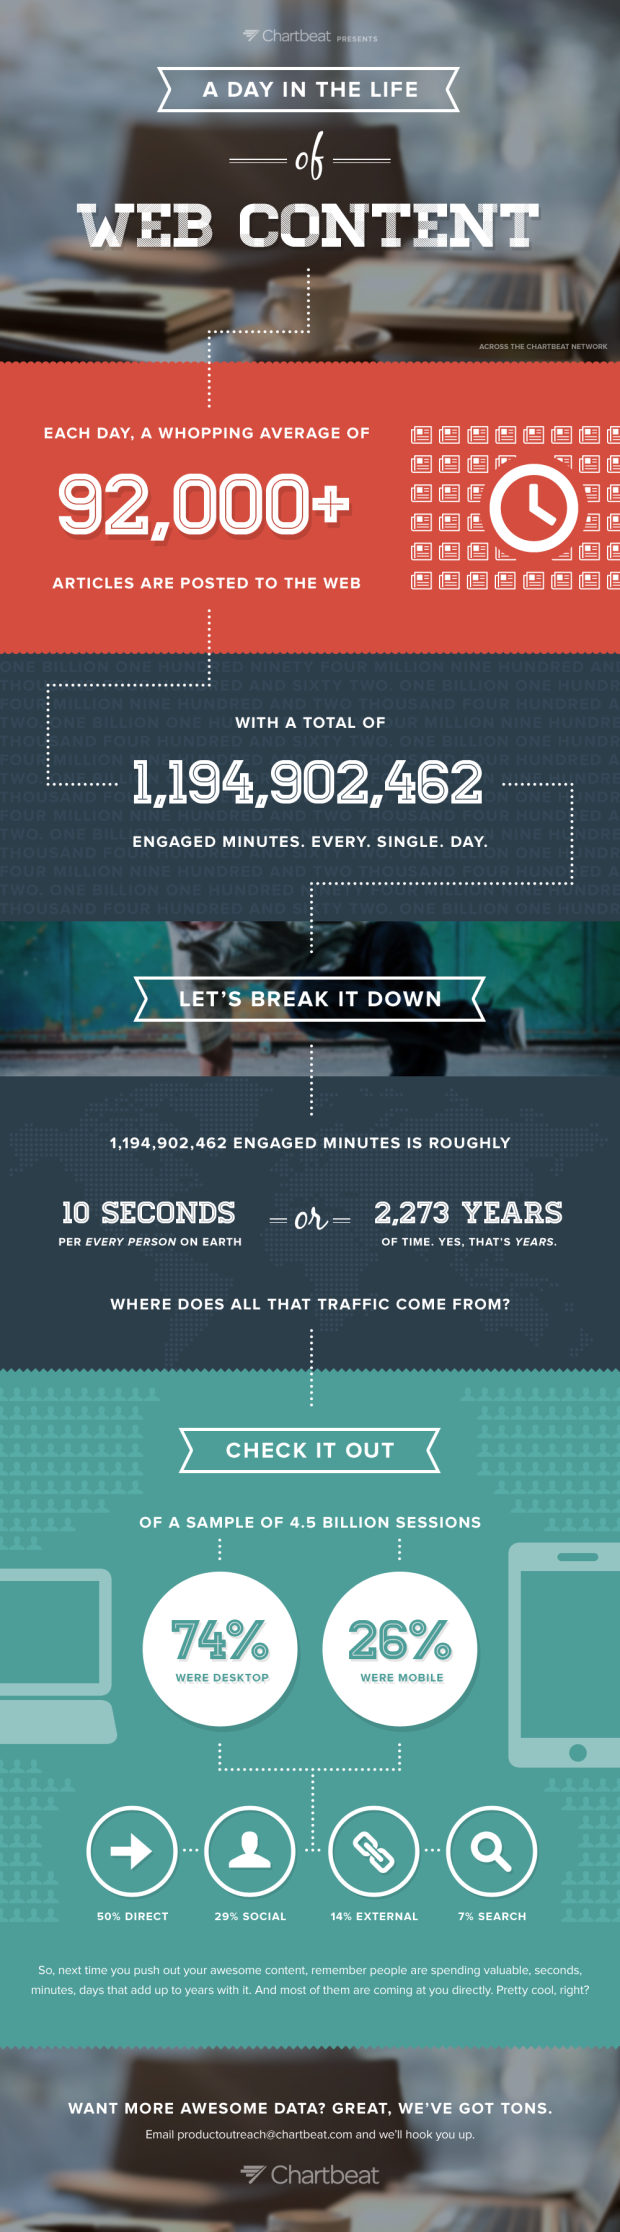 A Day in the Life of Web Content Infographic